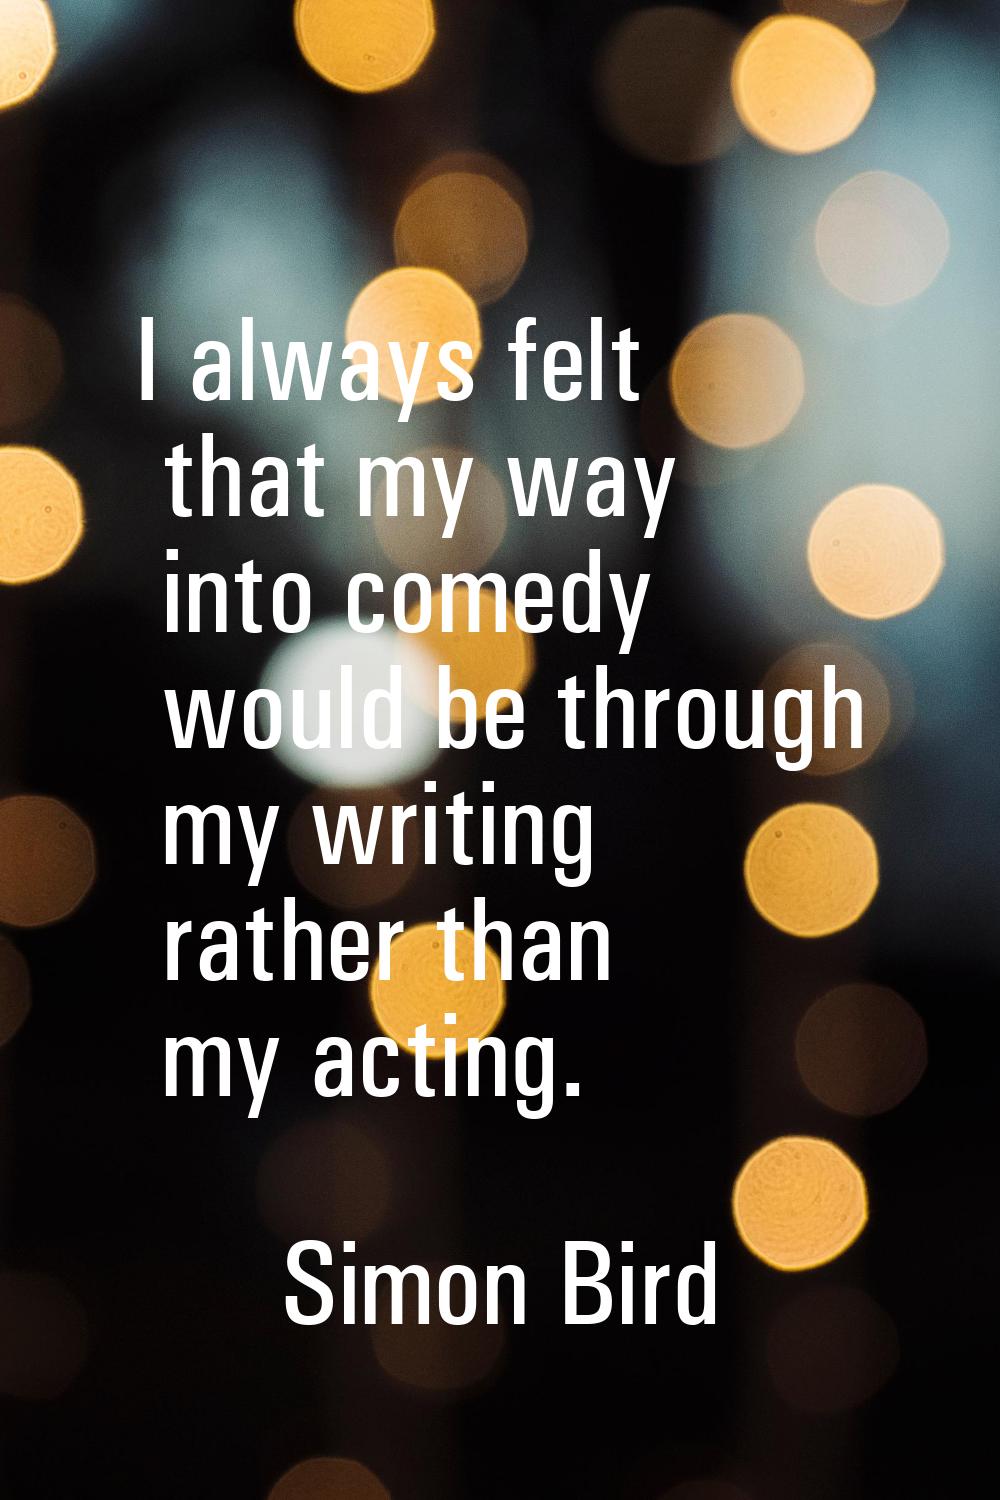 I always felt that my way into comedy would be through my writing rather than my acting.